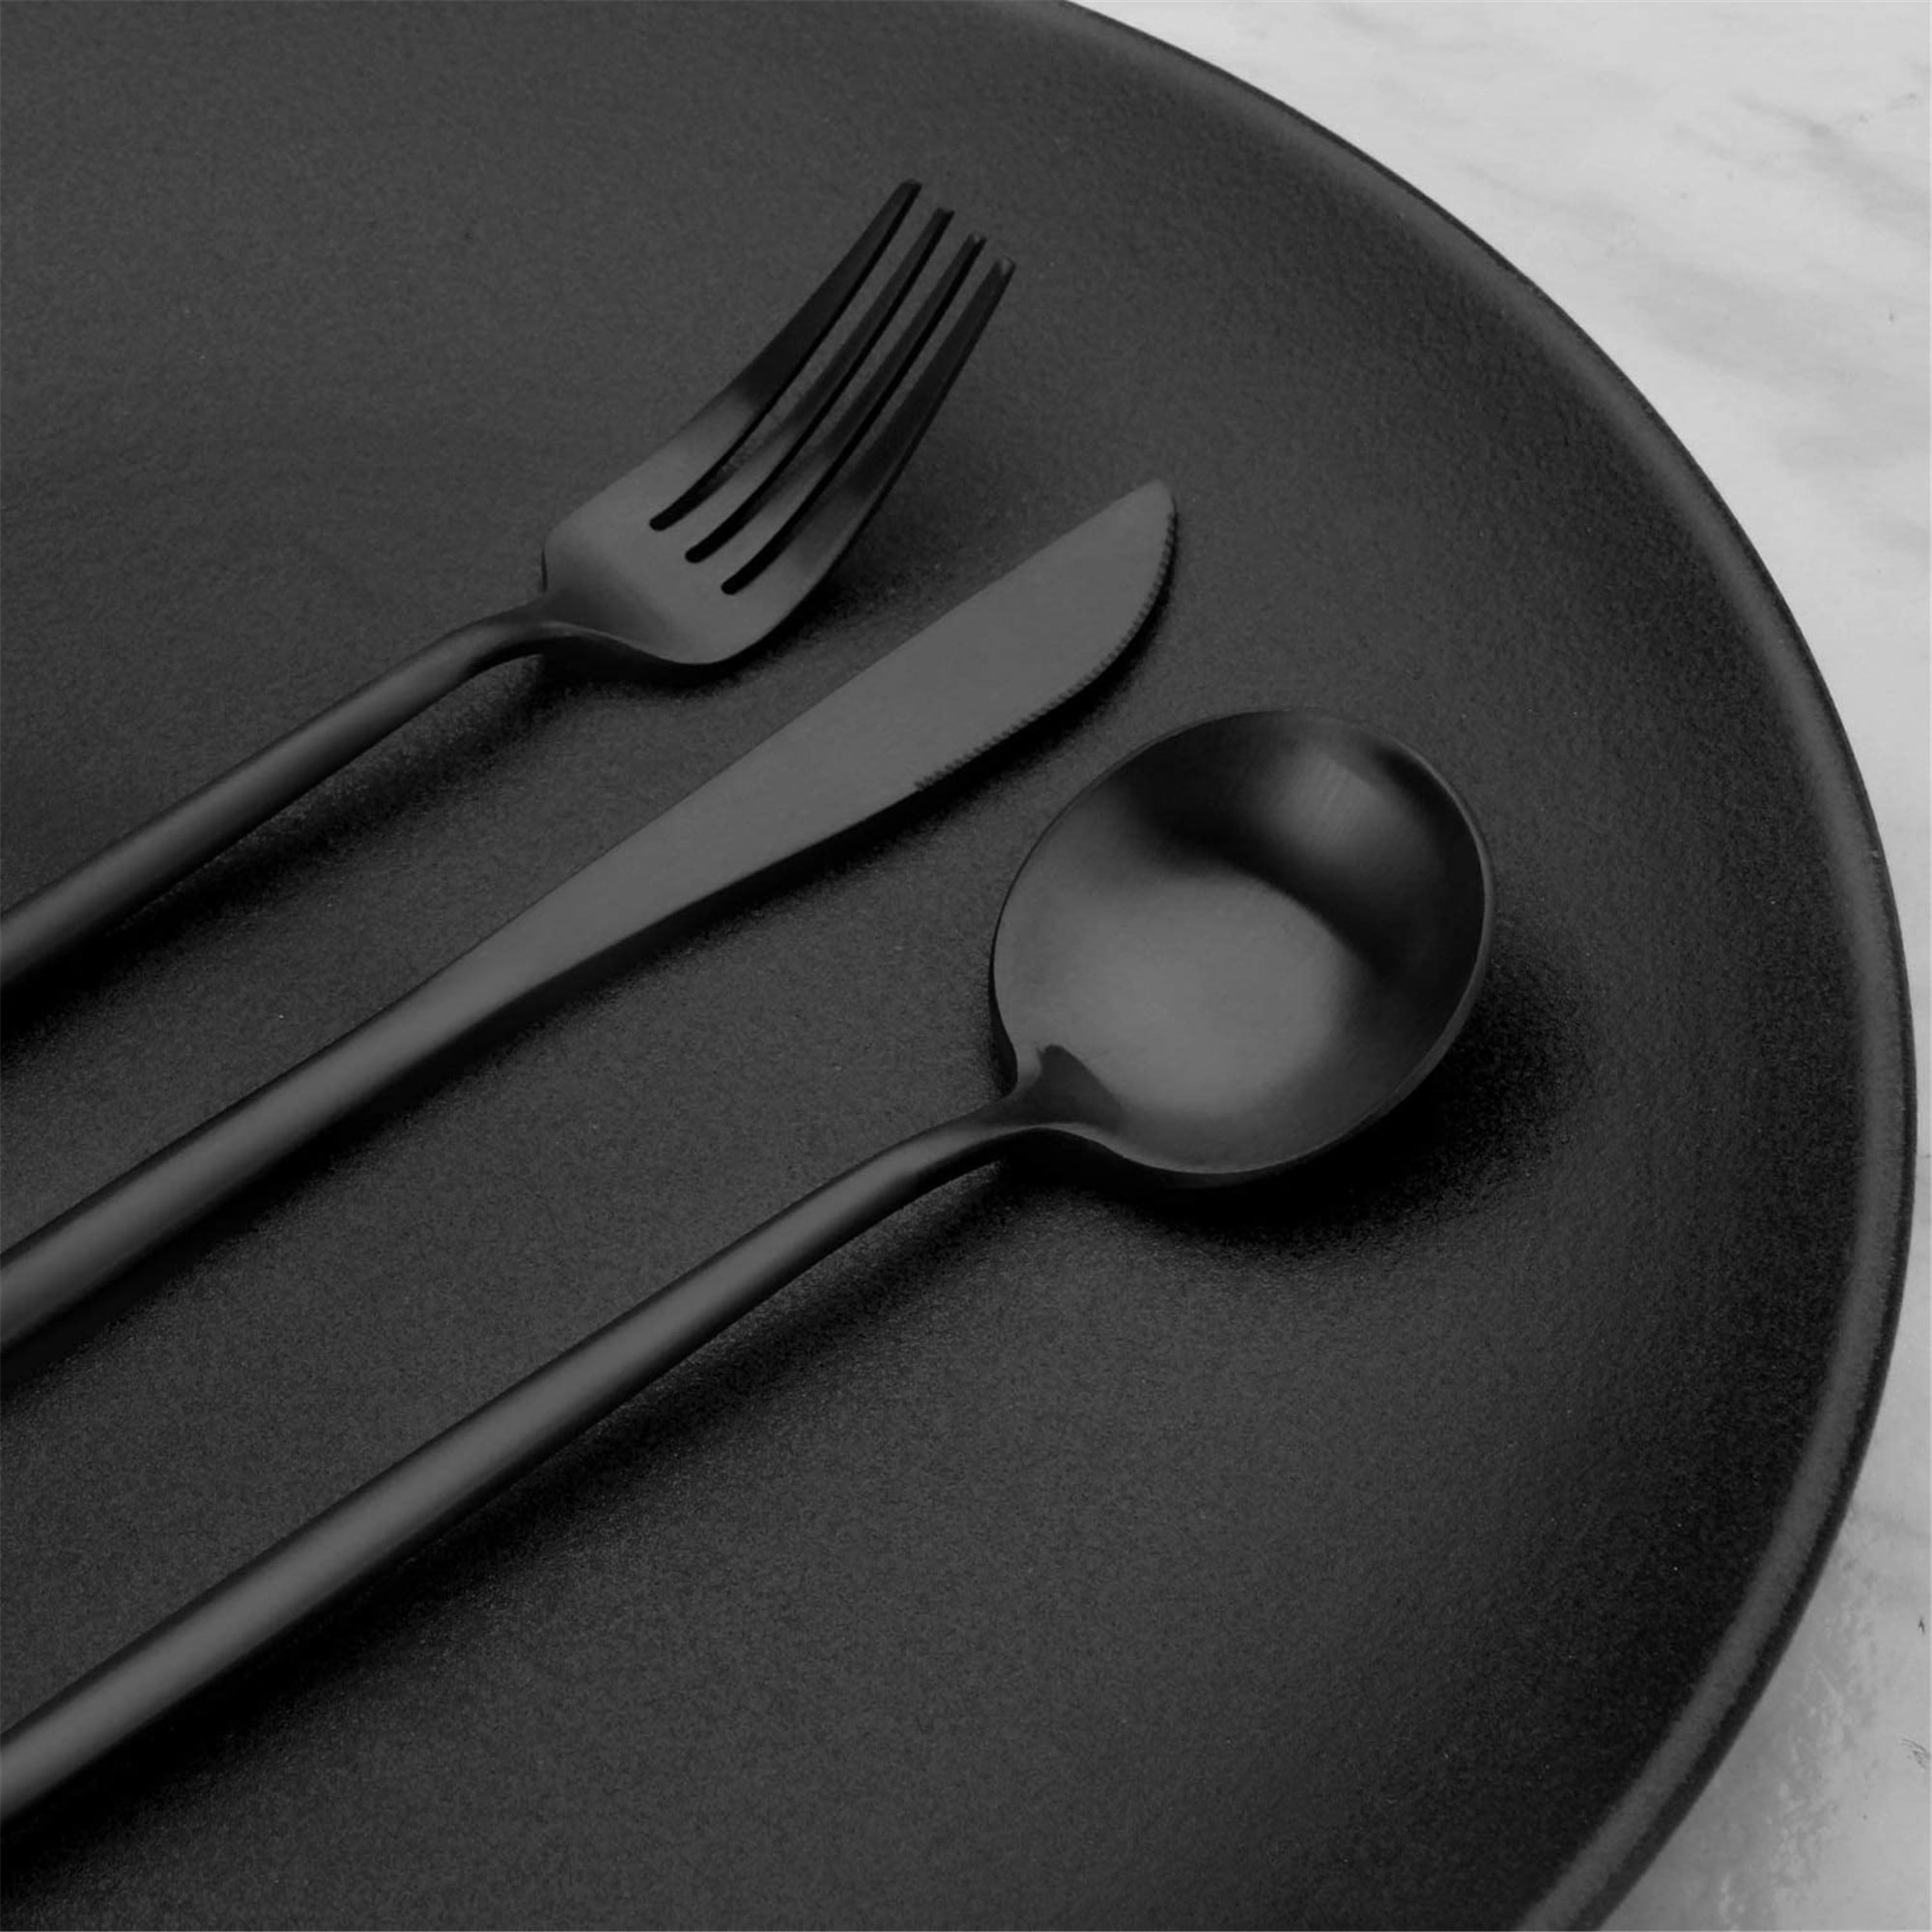 Matte Black Silverware Set, 20-Piece Stainless Steel Flatware Set Service  for 4, Satin Finish Tableware Cutlery Set for Home and Restaurant